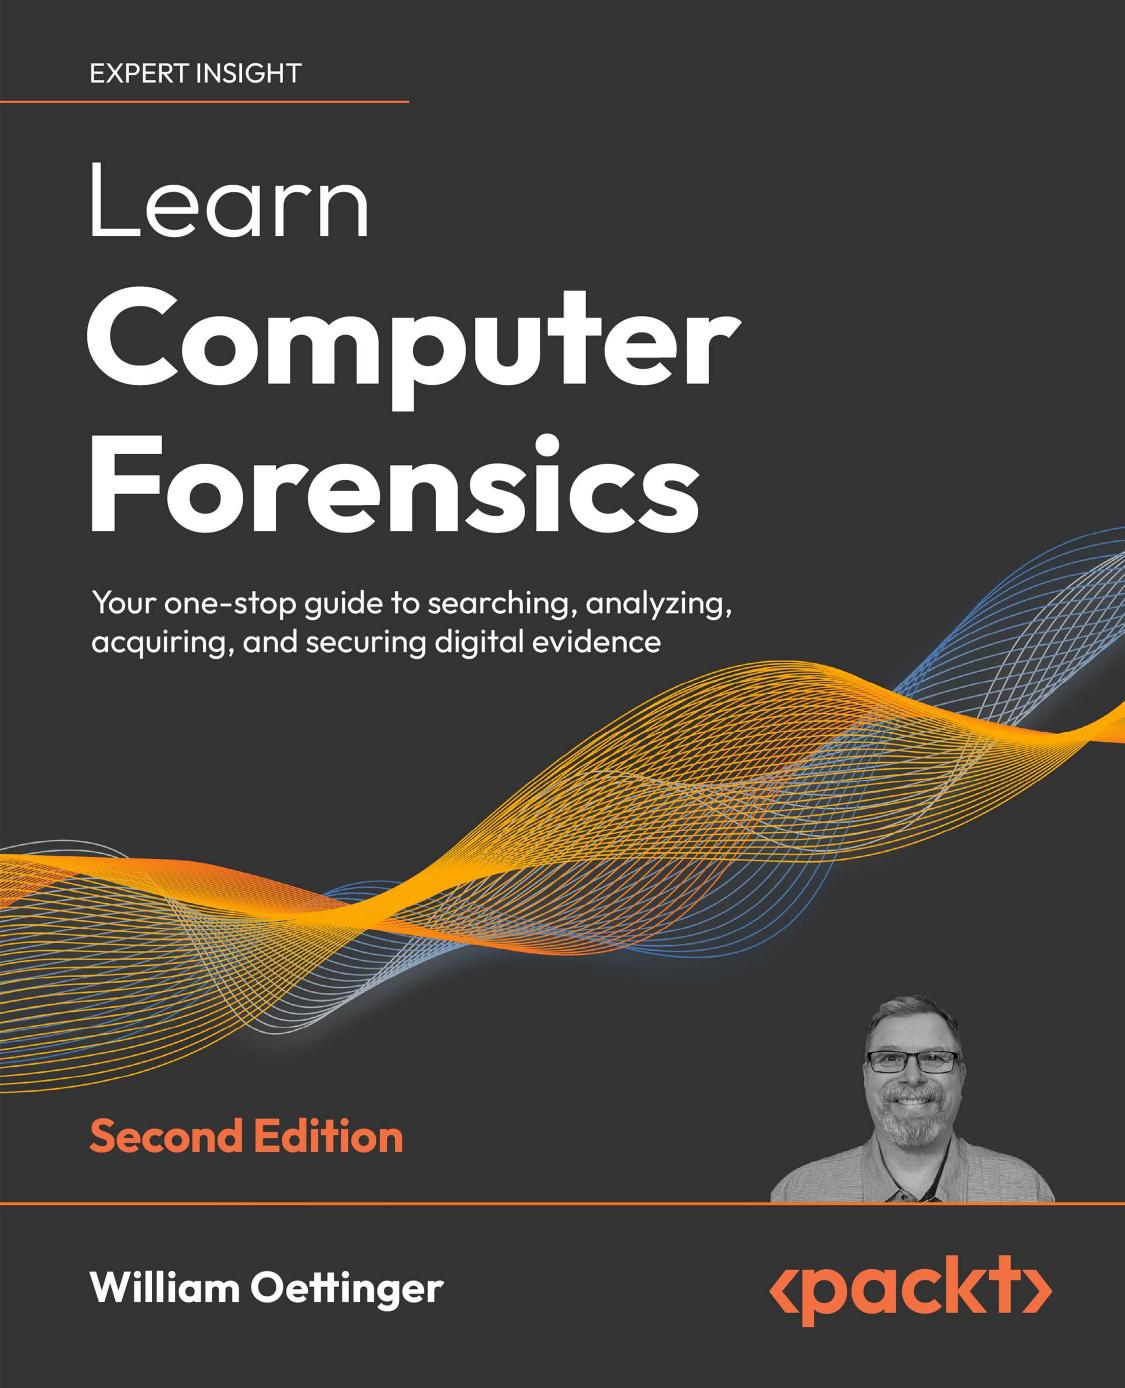 Learn Computer Forensics - Your one-stop guide to searching, analyzing, acquiring, and securing digital evidence - 2nd Edition (2022) by Packt